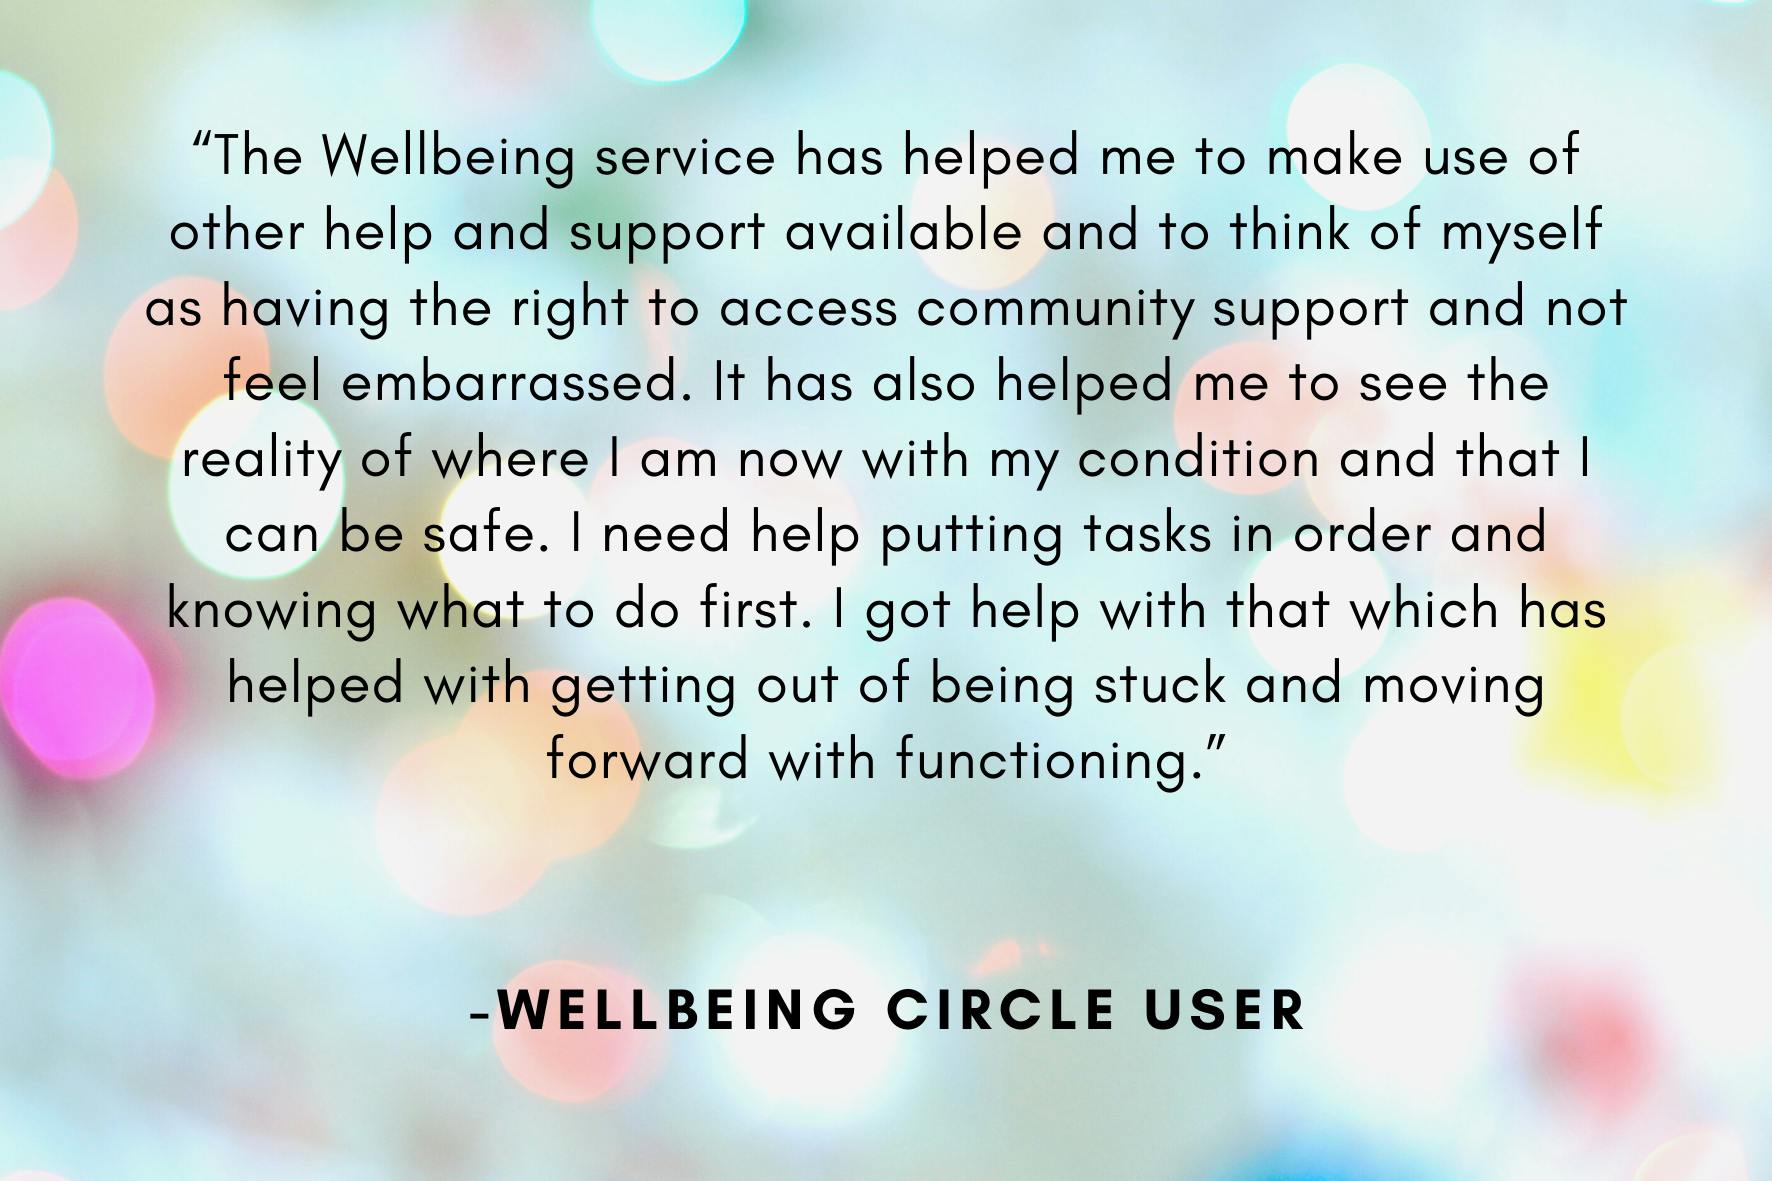 Wellbeing Circle user quote